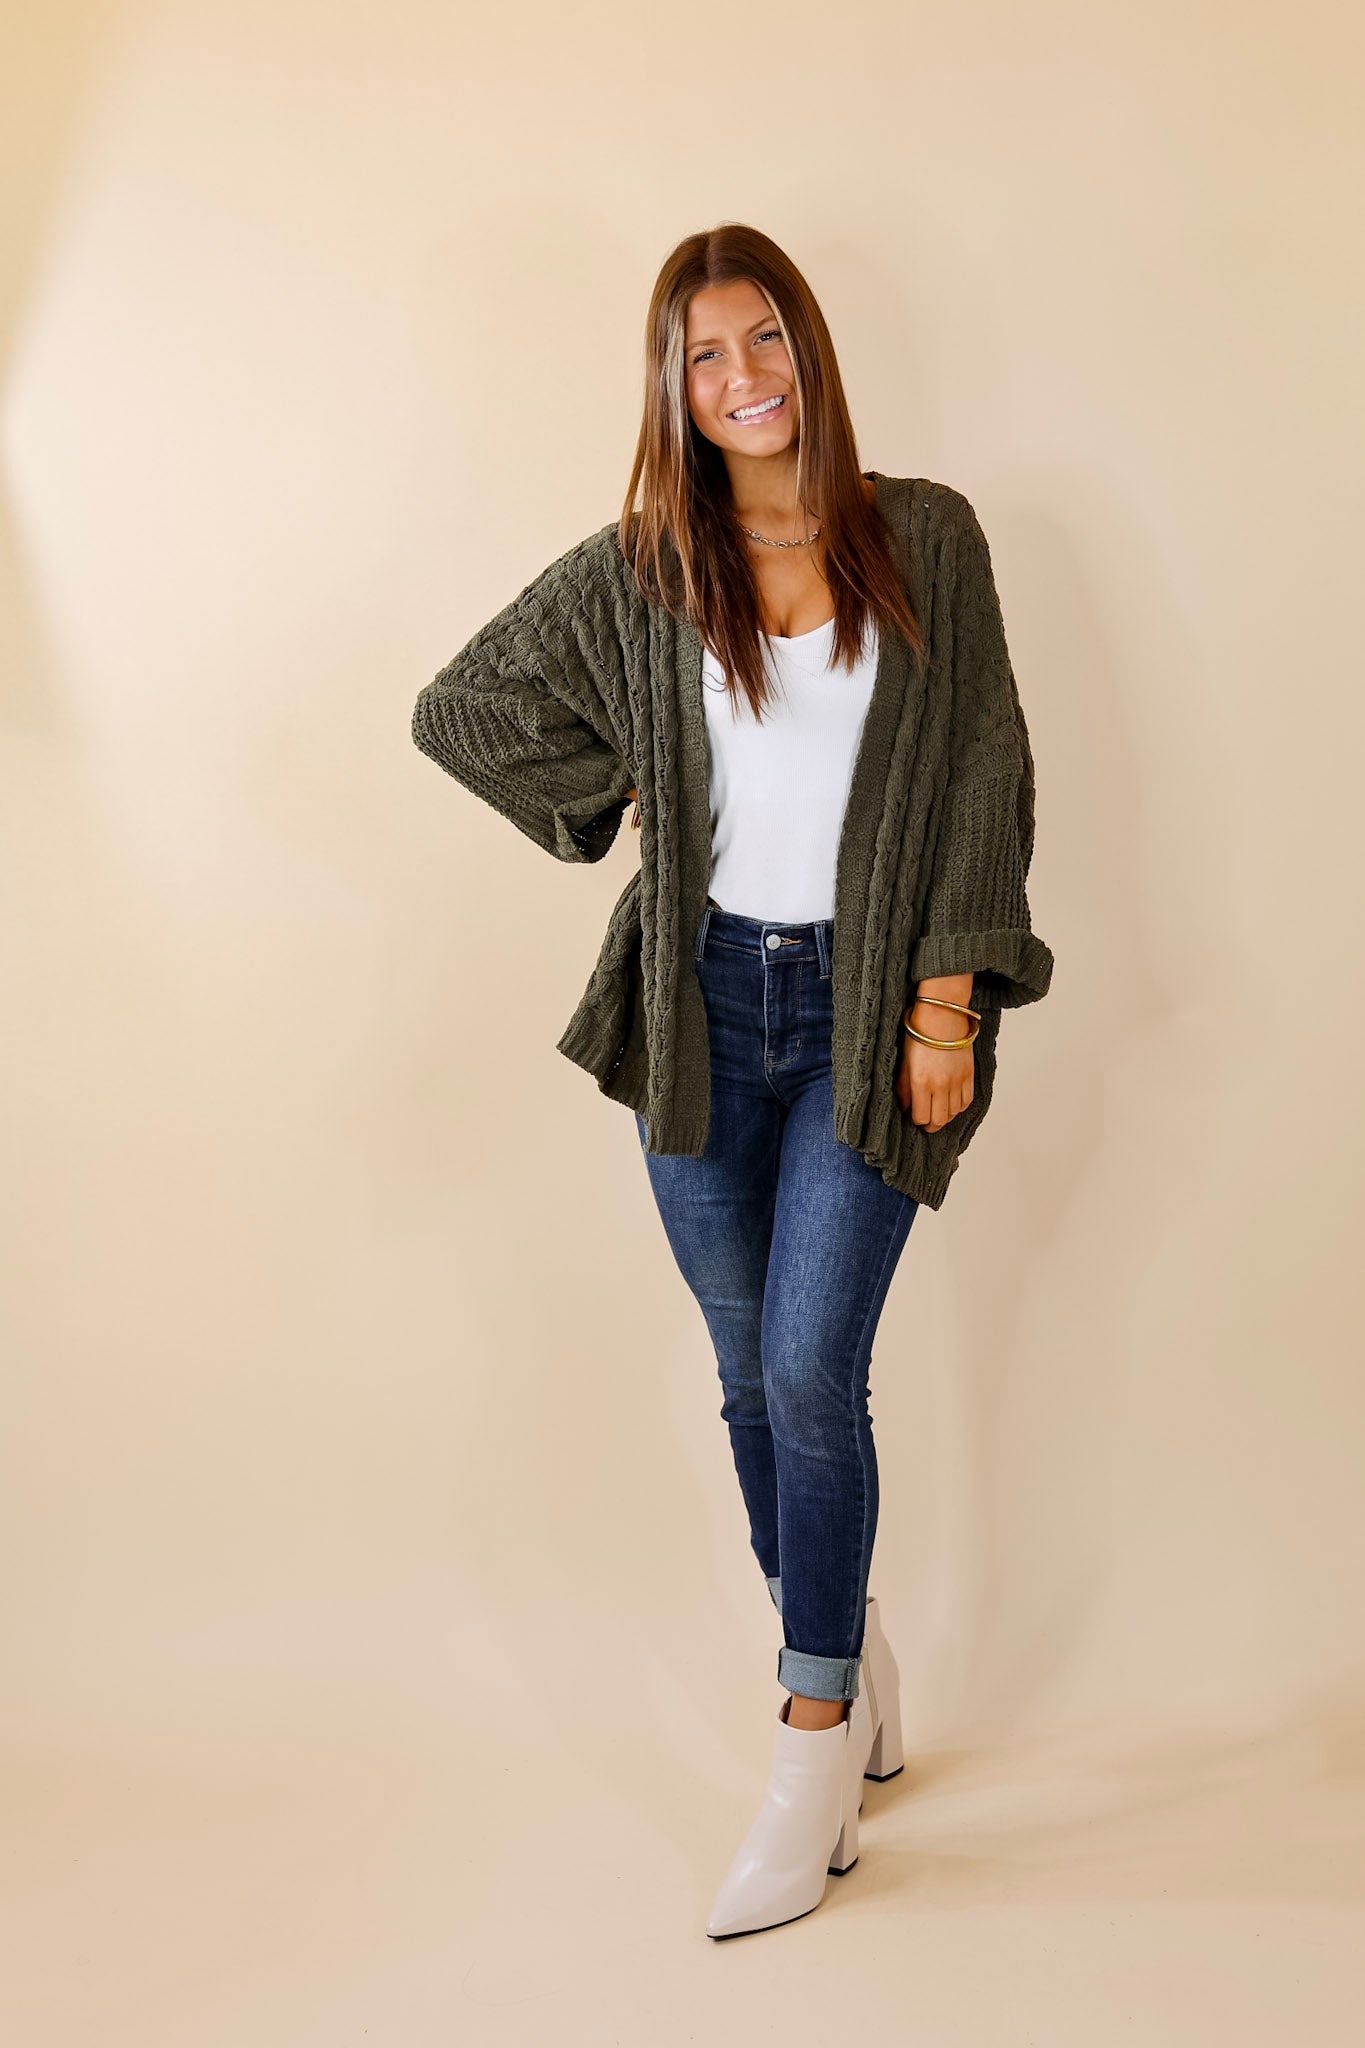 On My Level Chenille Cable Knit Open Front Cardigan in Olive Green - Giddy Up Glamour Boutique